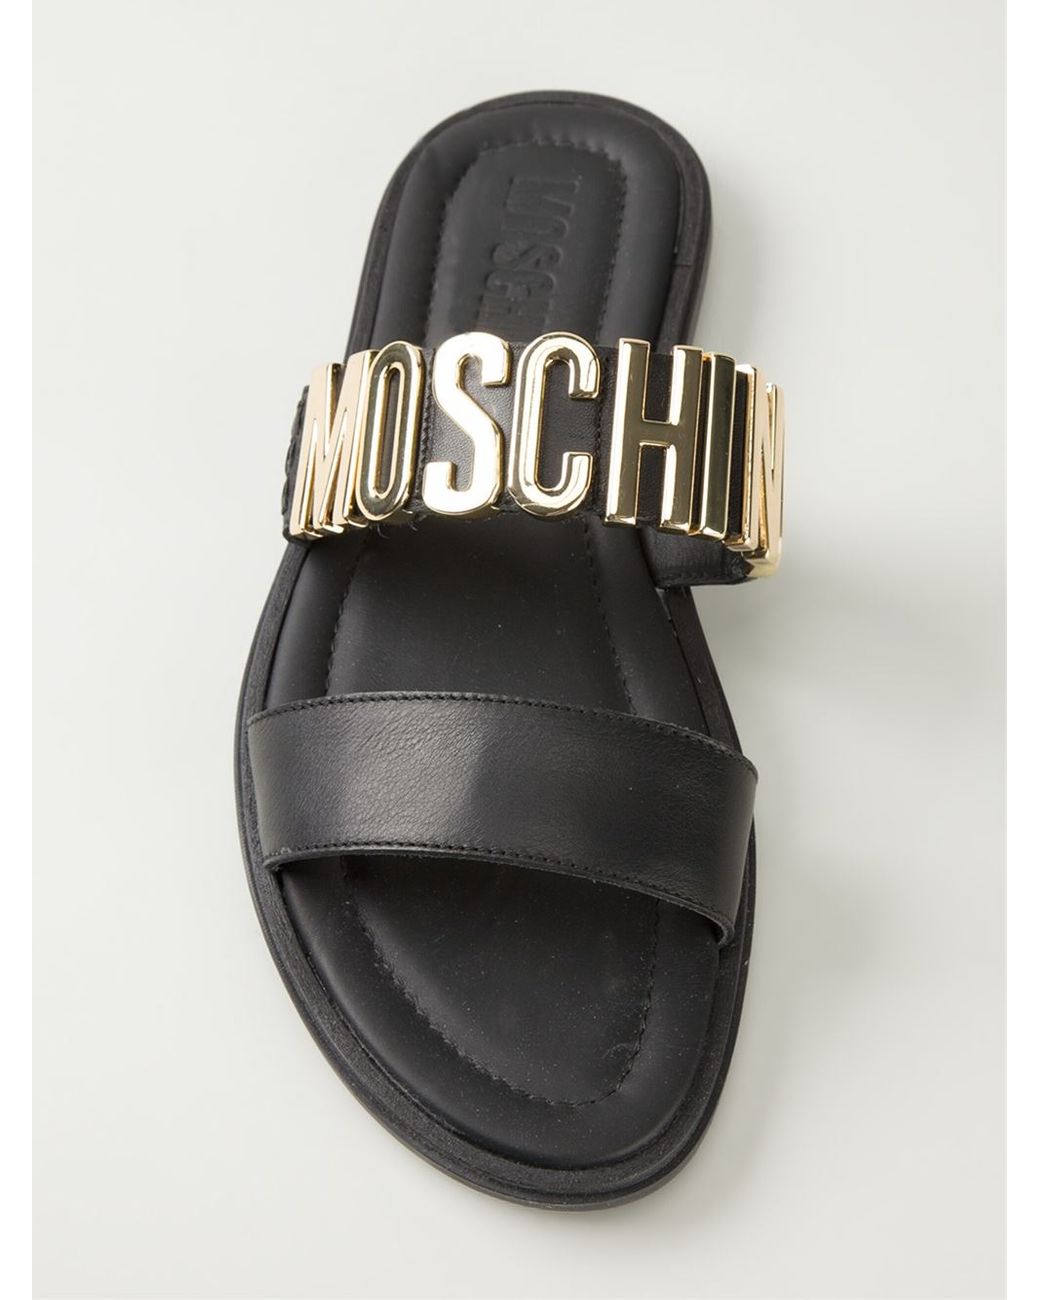 Moschino Logo Plaque Sandals in Black for Men | Lyst